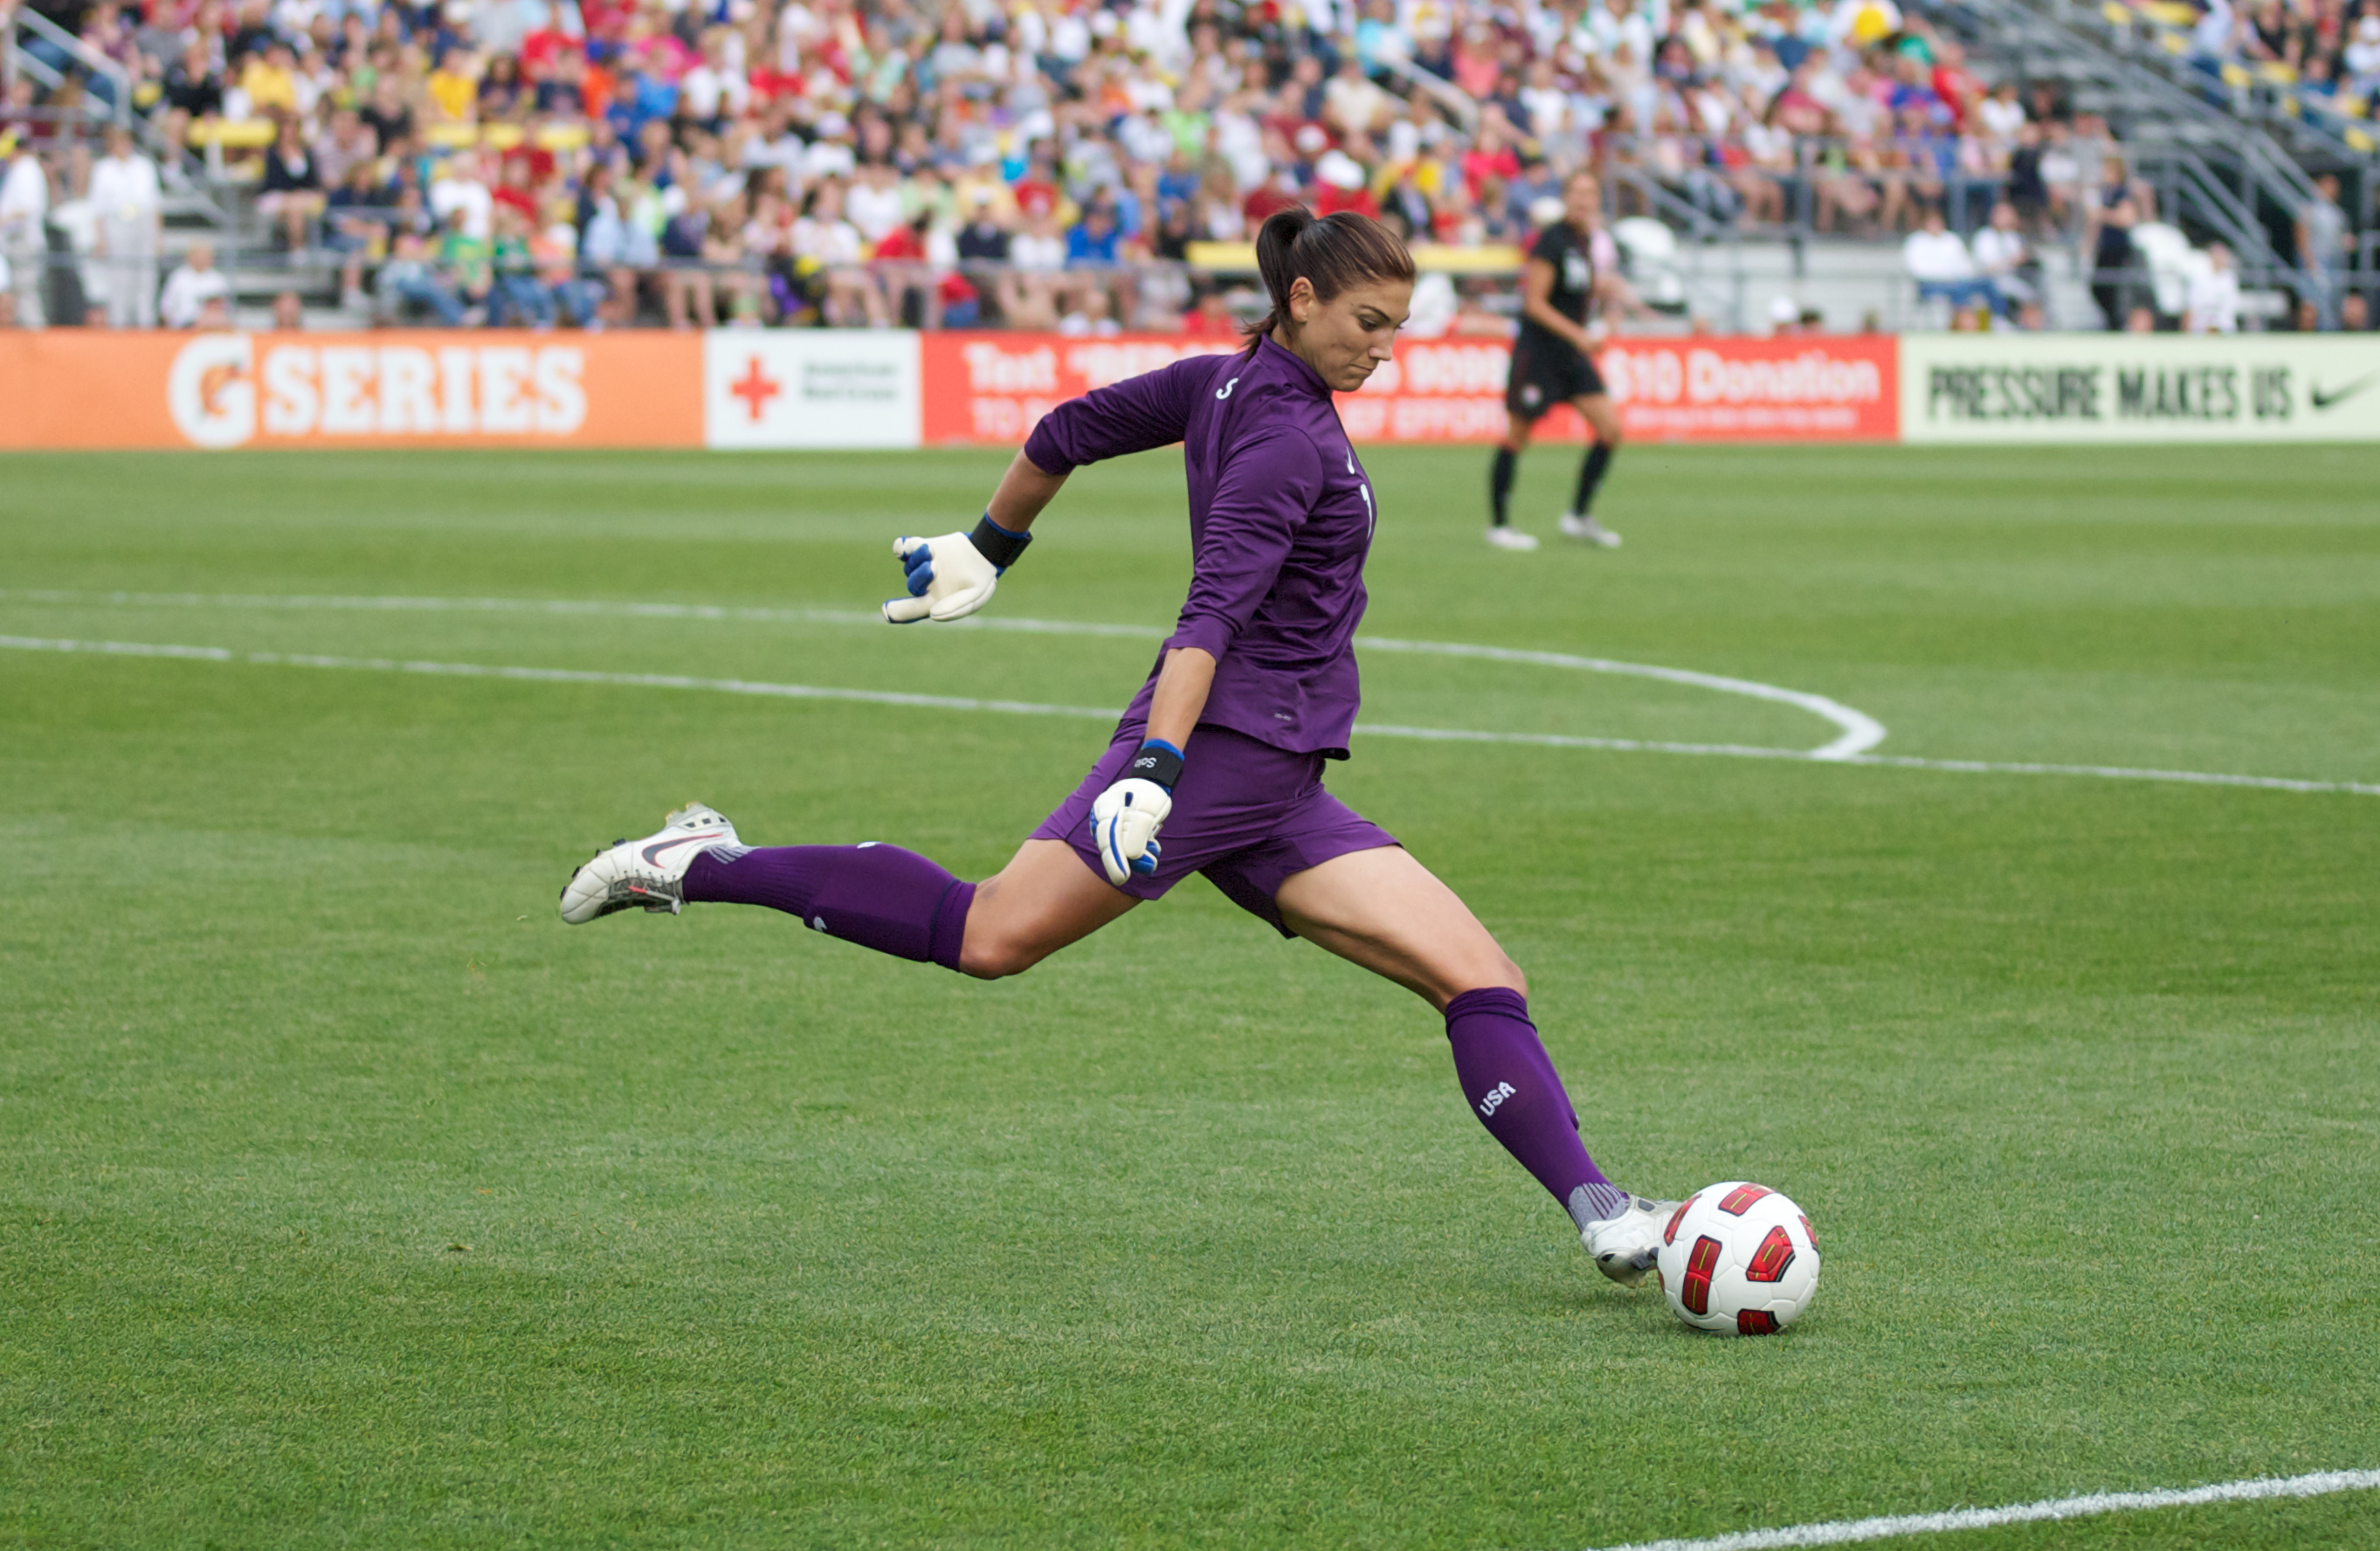 Hope Solo, HD wallpapers download, Stunning images, USA women's soccer, 2730x1780 HD Desktop